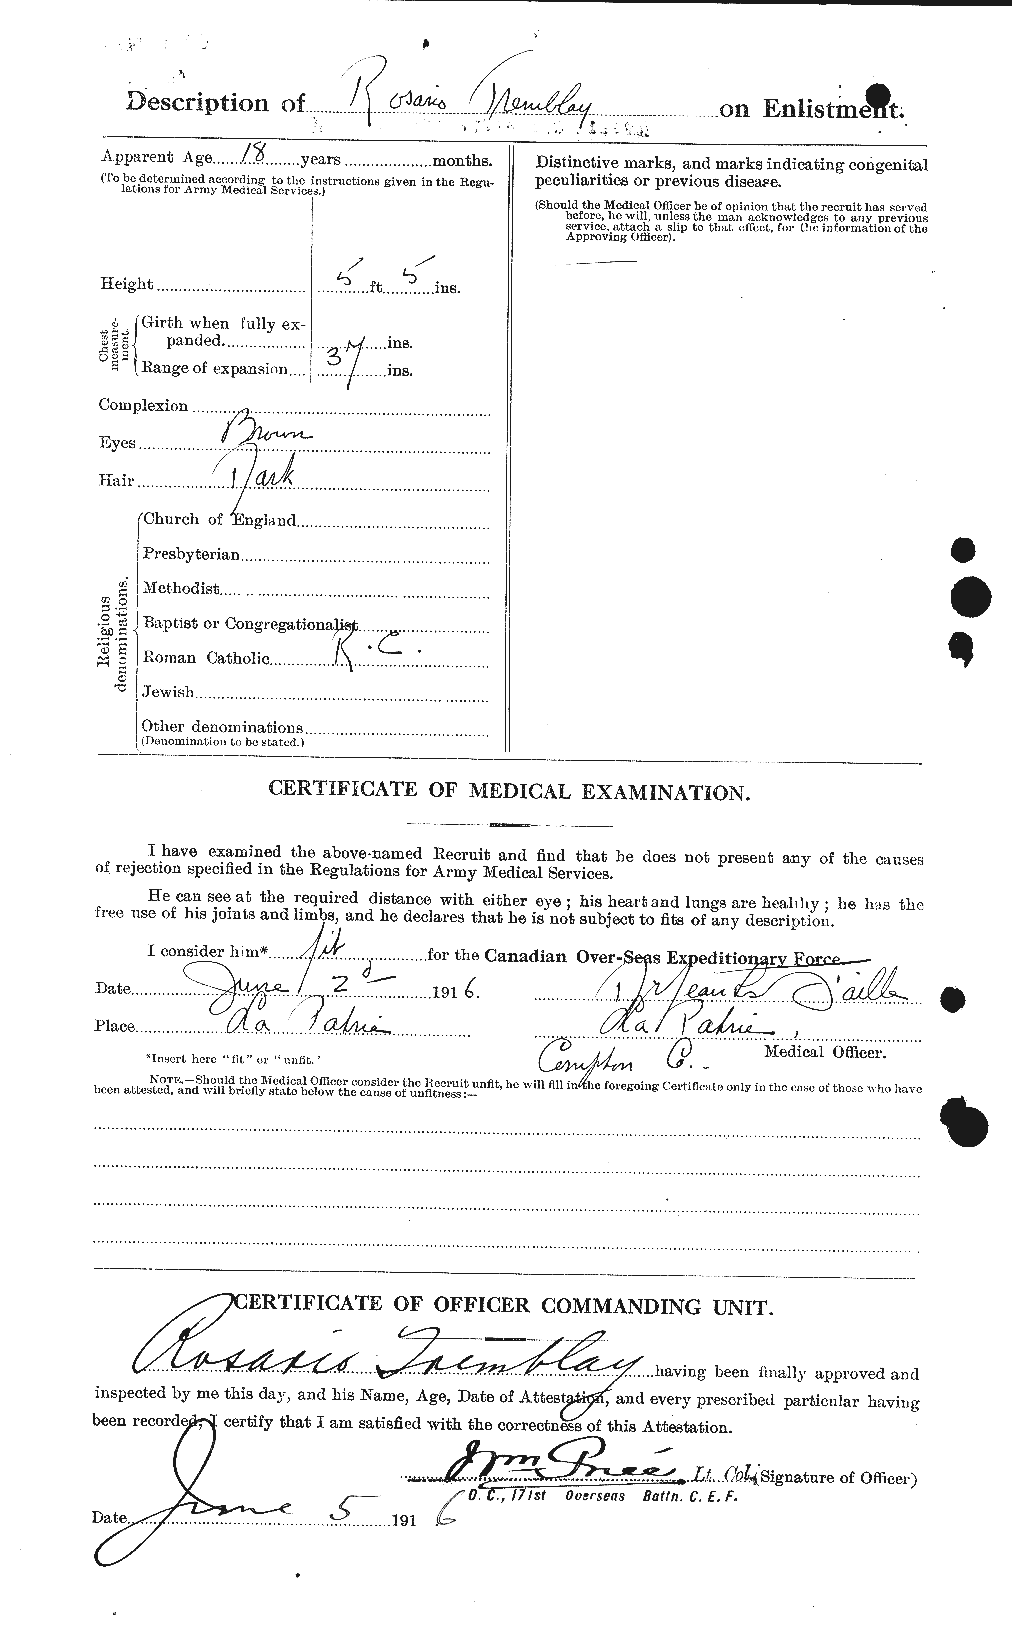 Personnel Records of the First World War - CEF 638298b